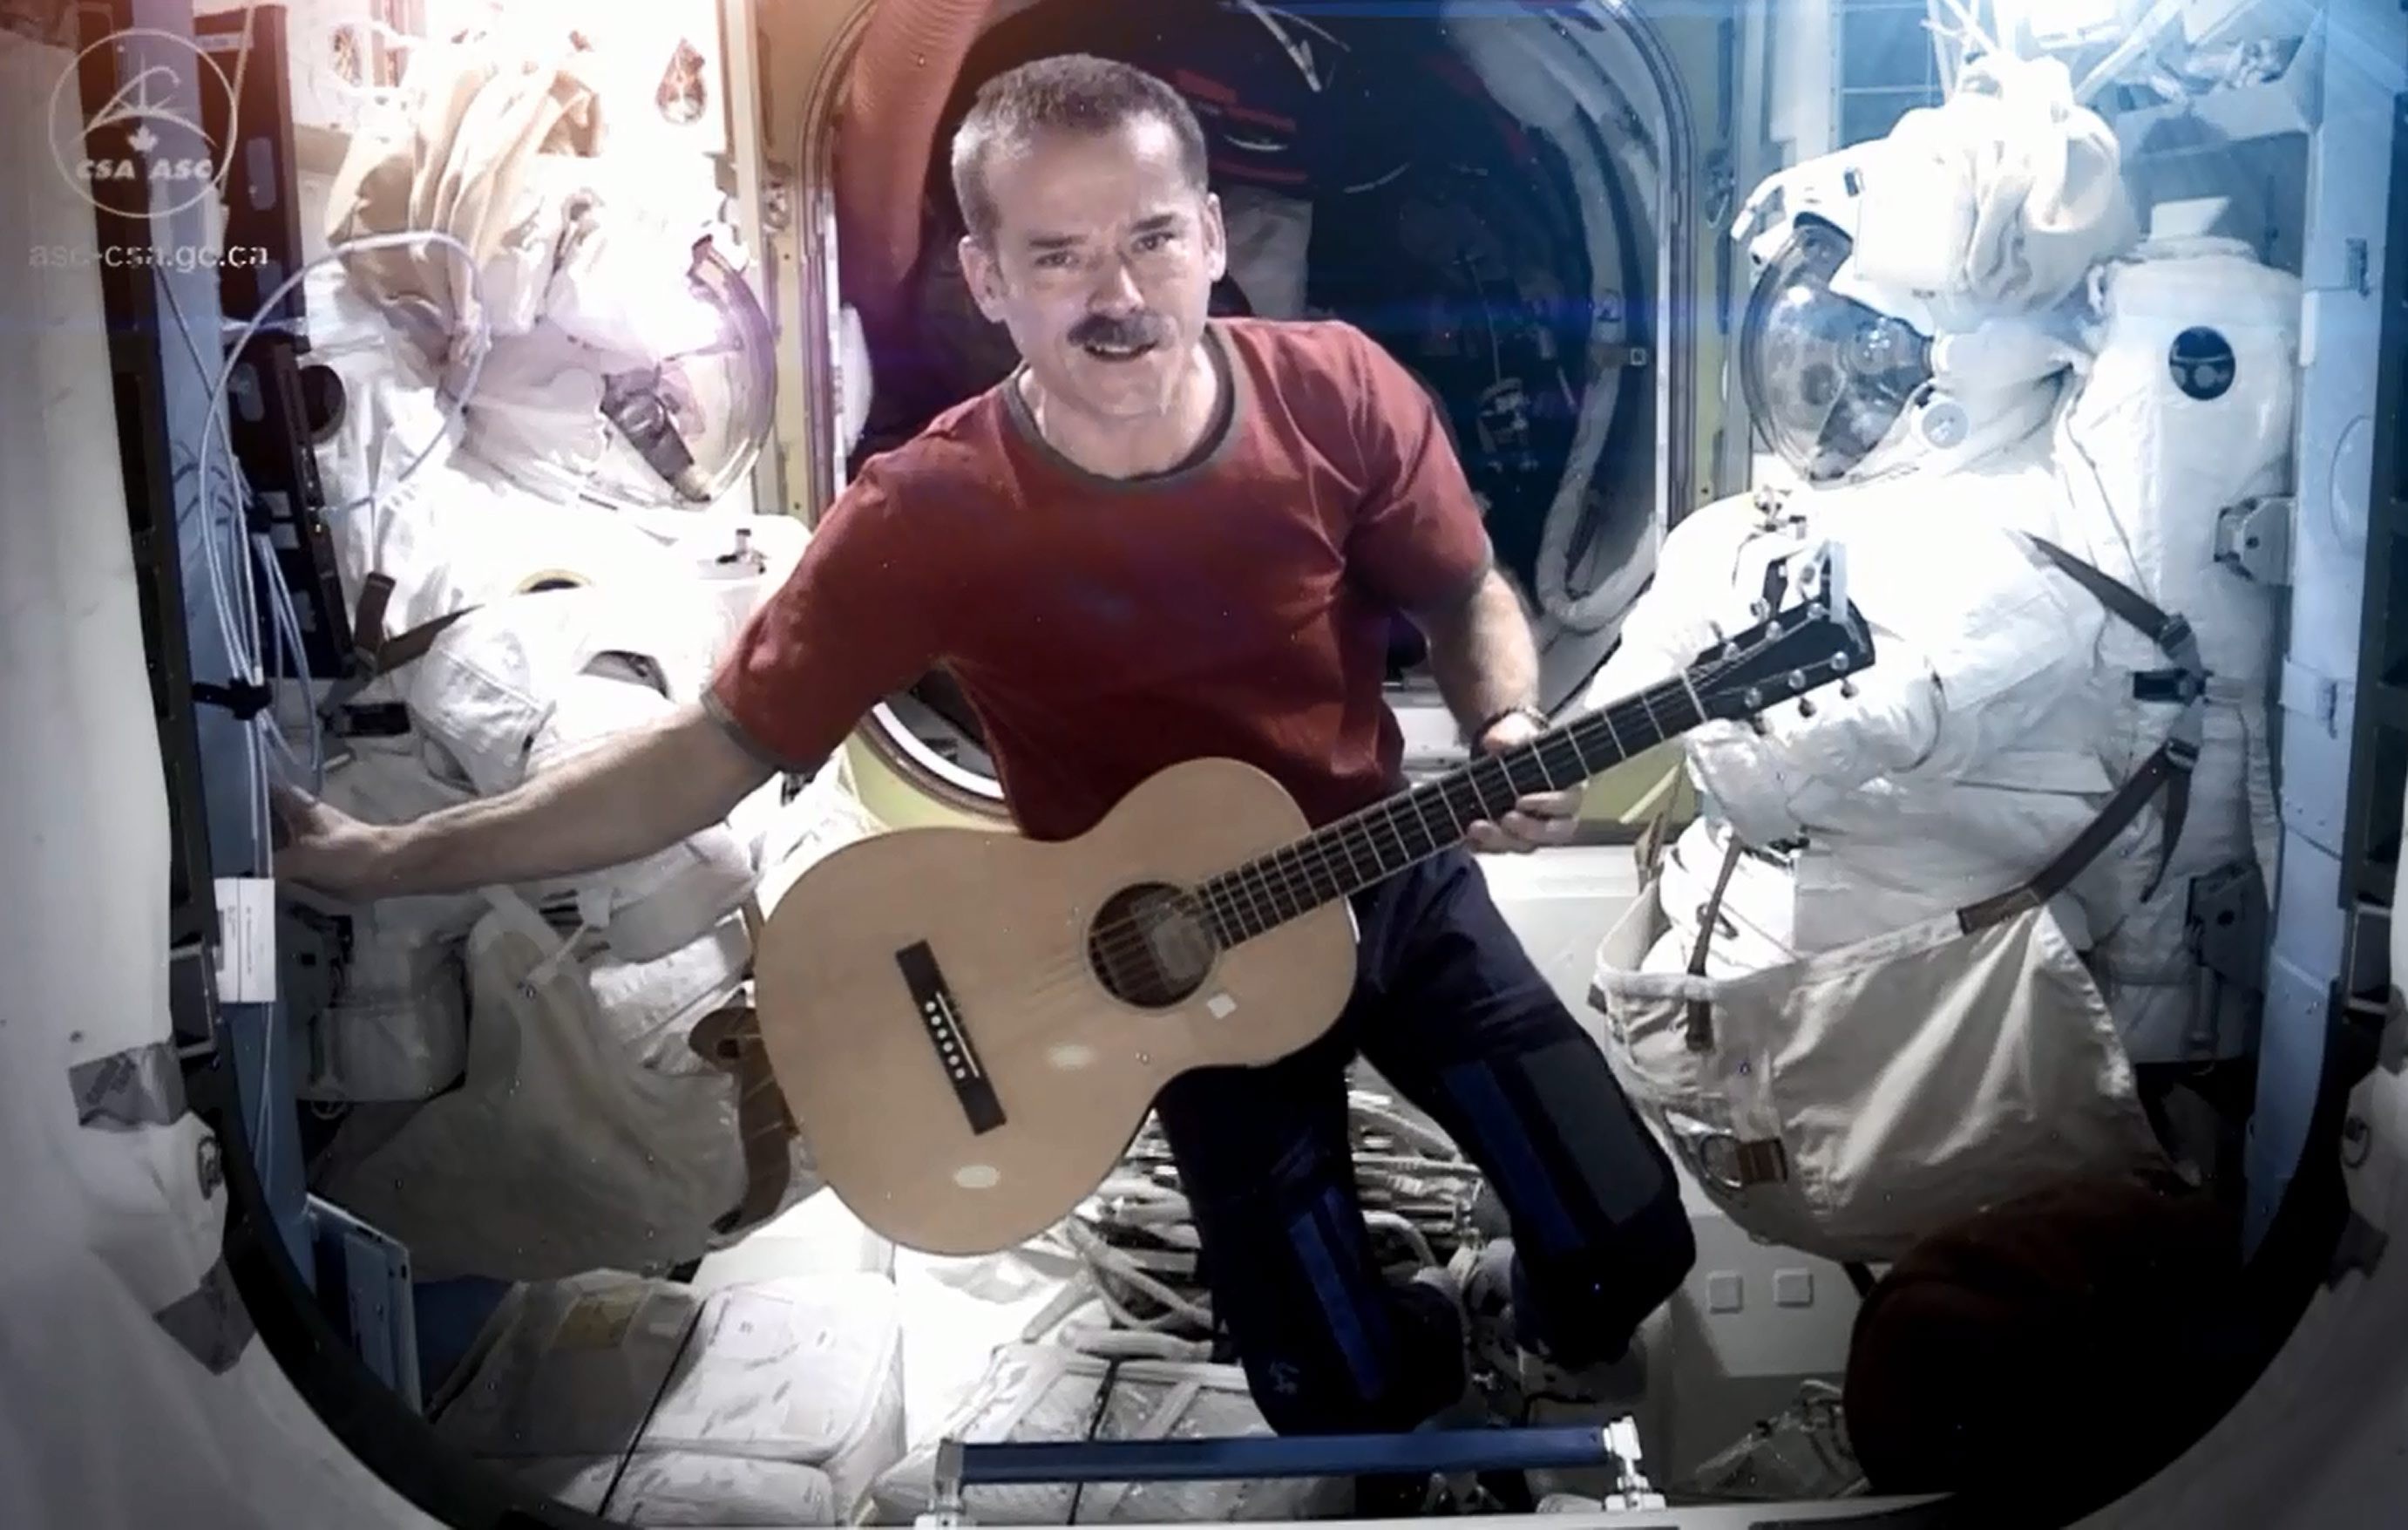 Astronaut Chris Hadfield performs a version of David Bowie’s song ‘Space Oddity’ while orbiting the Earth – something professional musicians have yet to top – on board the International Space Station in 2013. Photo: EPA/Nasa/CSA/Chris Hadfield